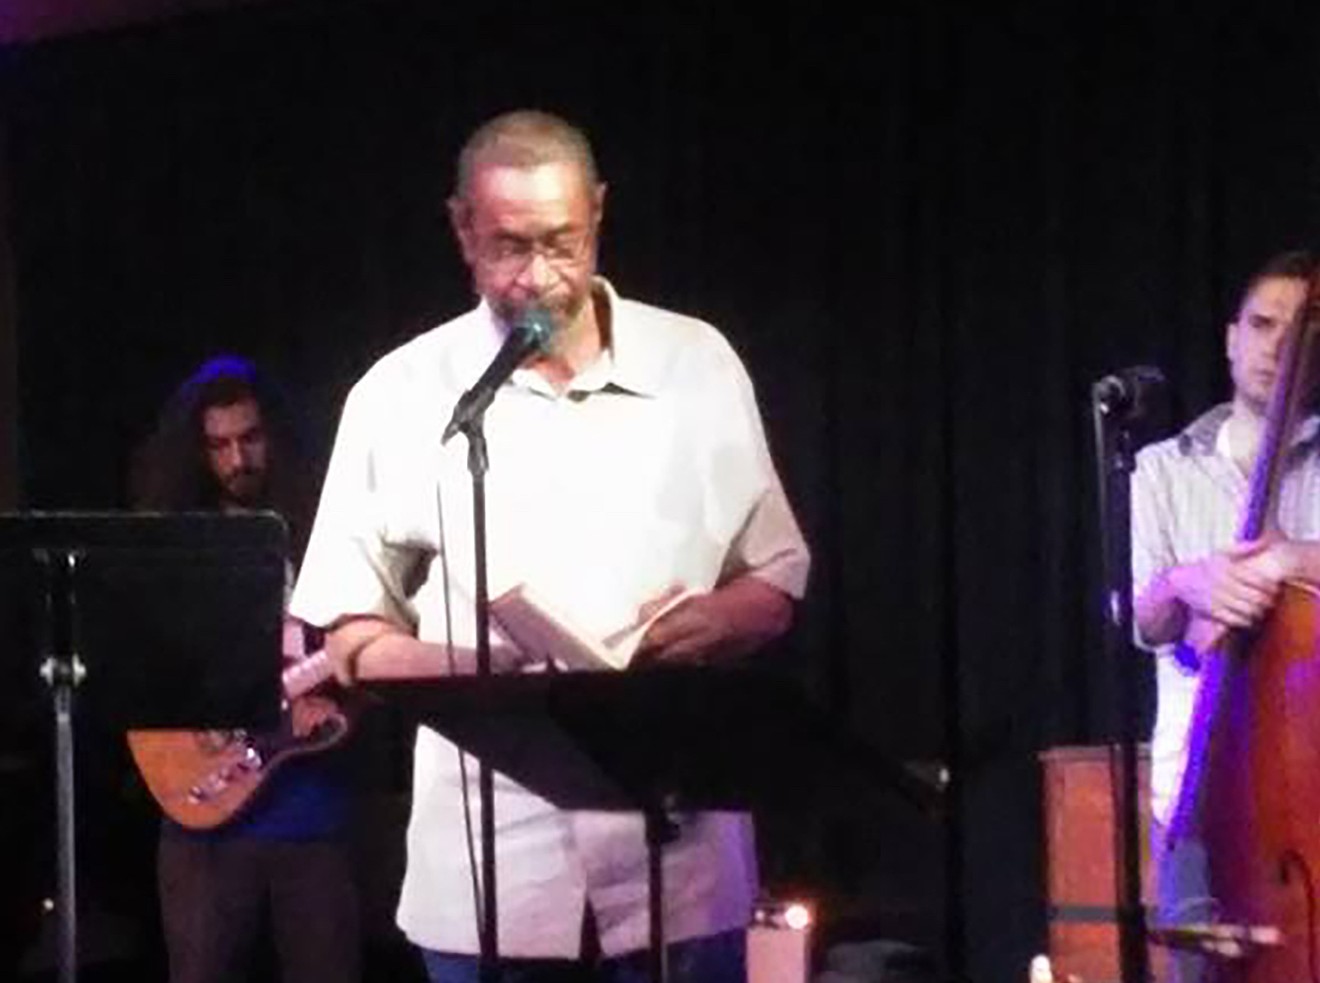 William "Wonderful" Jankins performing during a June 2017 event at The Nash in Roosevelt Row.